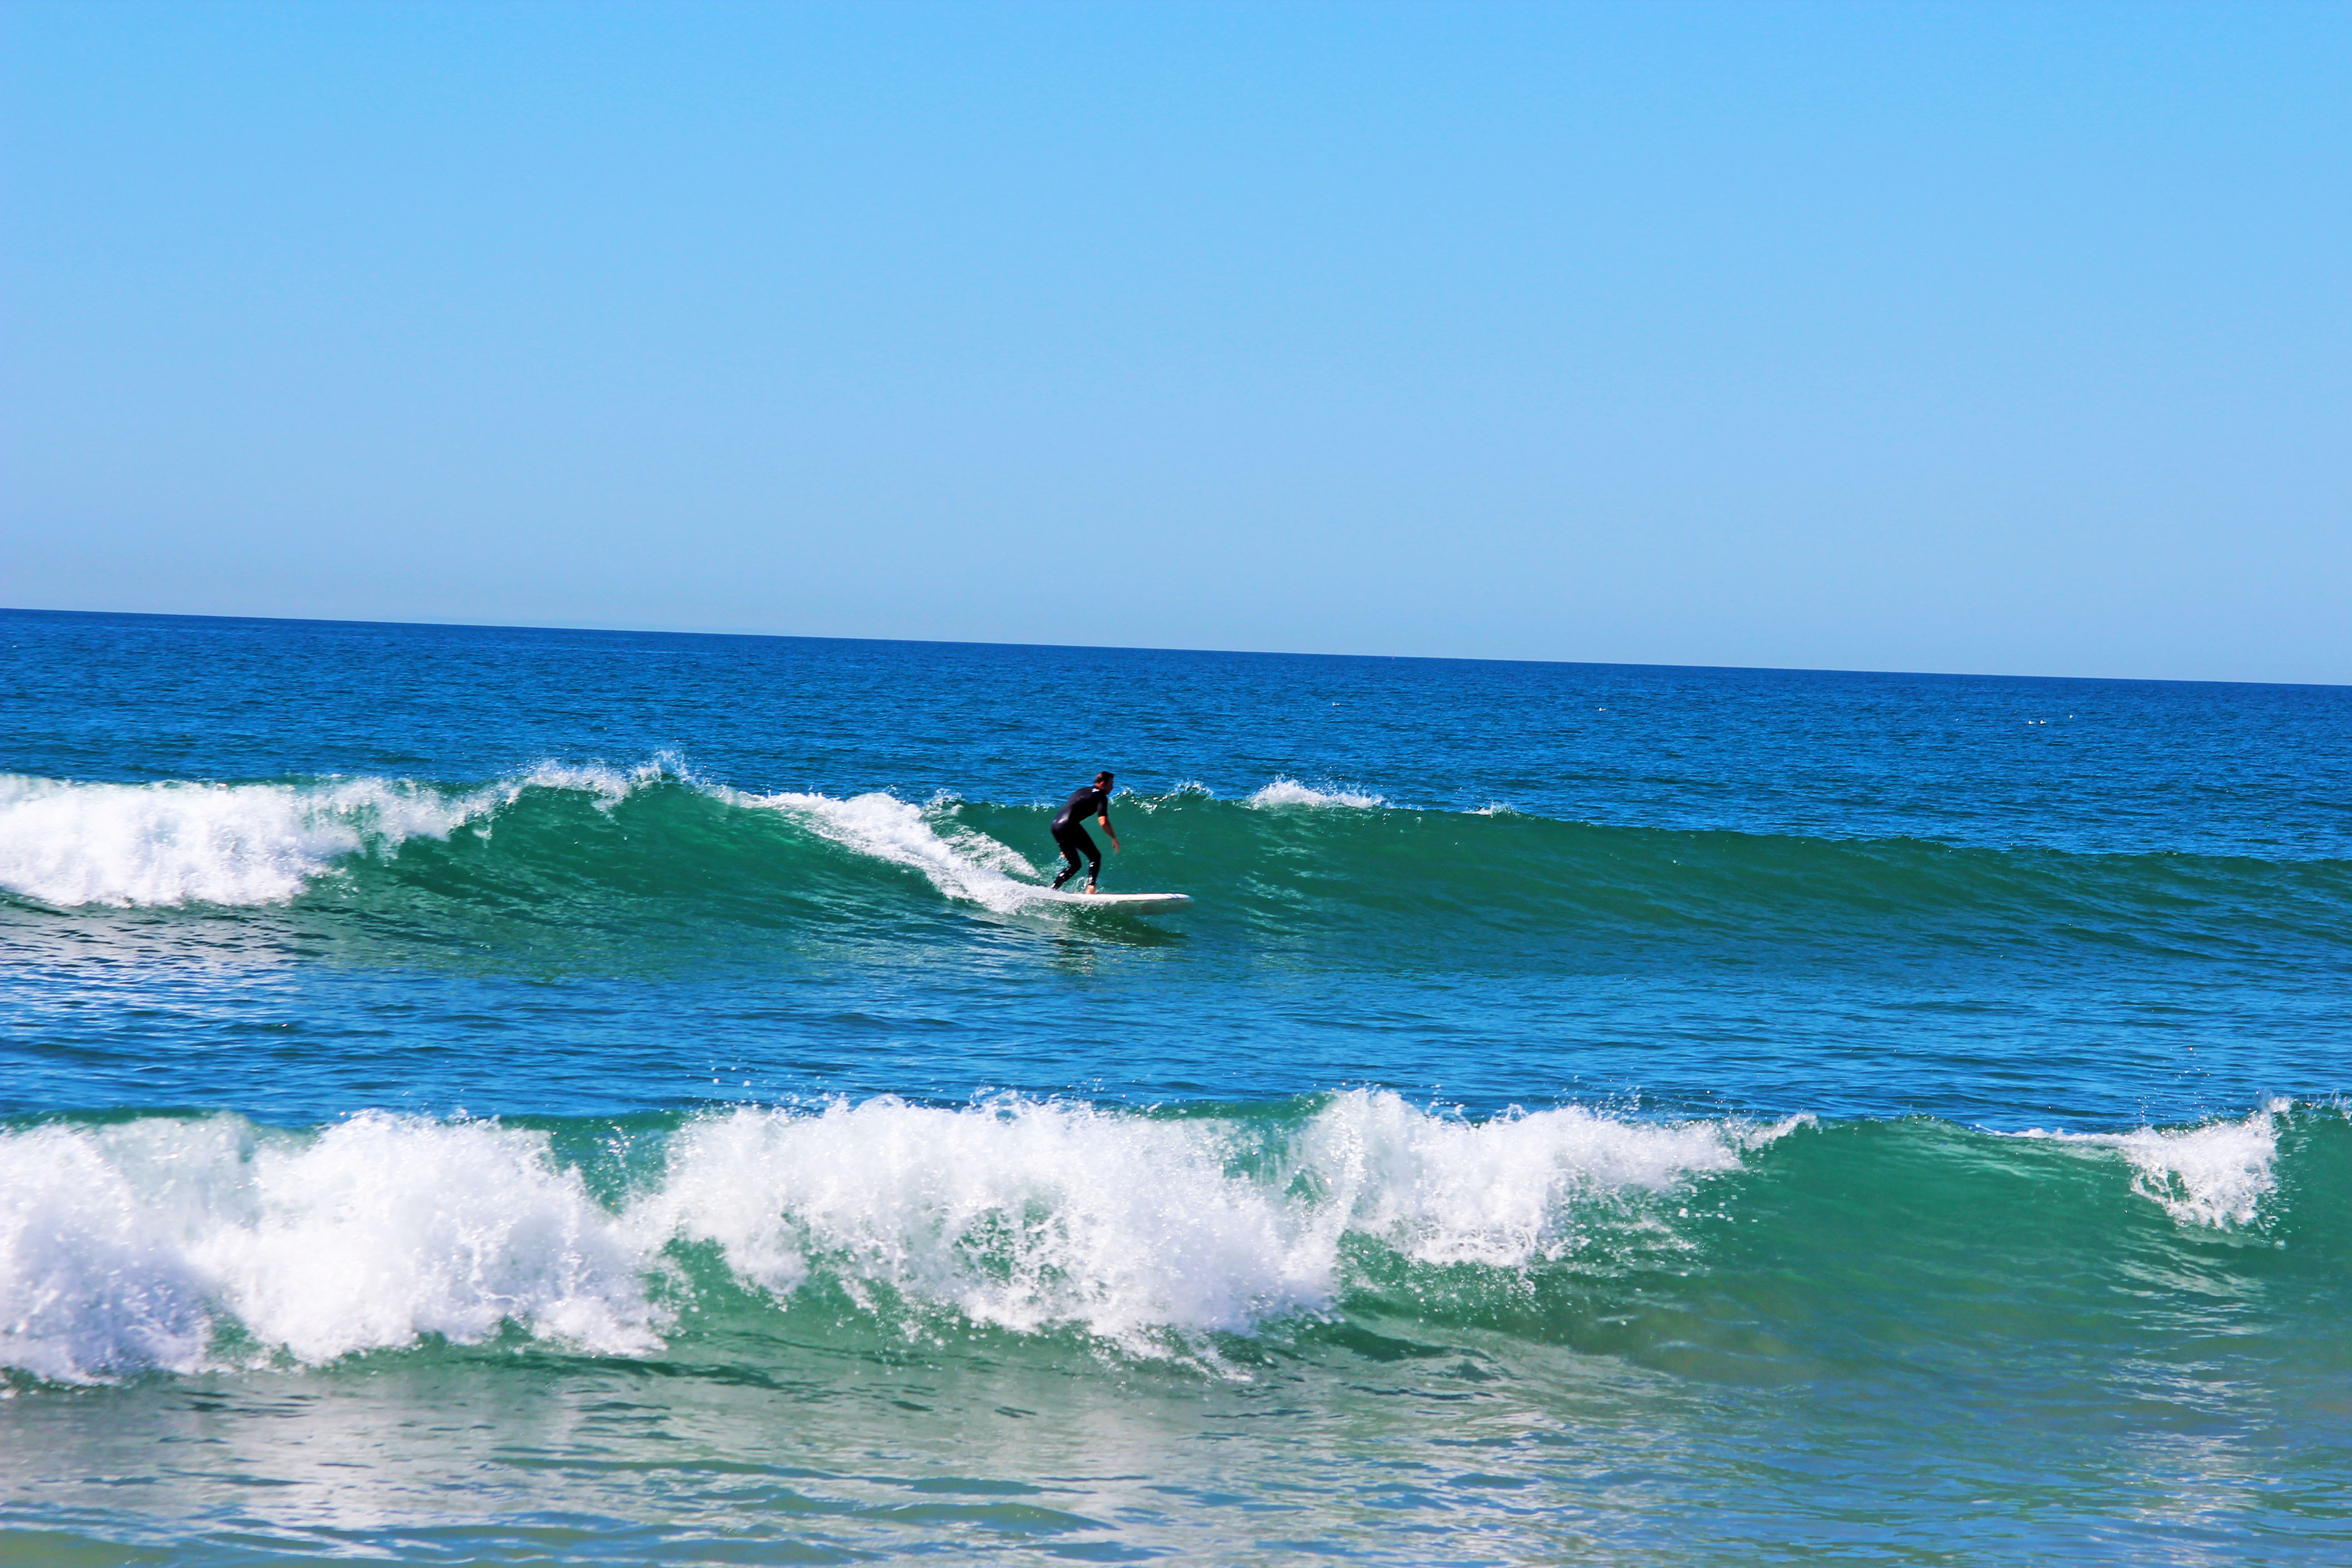 A surfer catching a wave at Buccaneers in South Oceanside, March 7,2014. (Kirk Mattu/The Telescope)